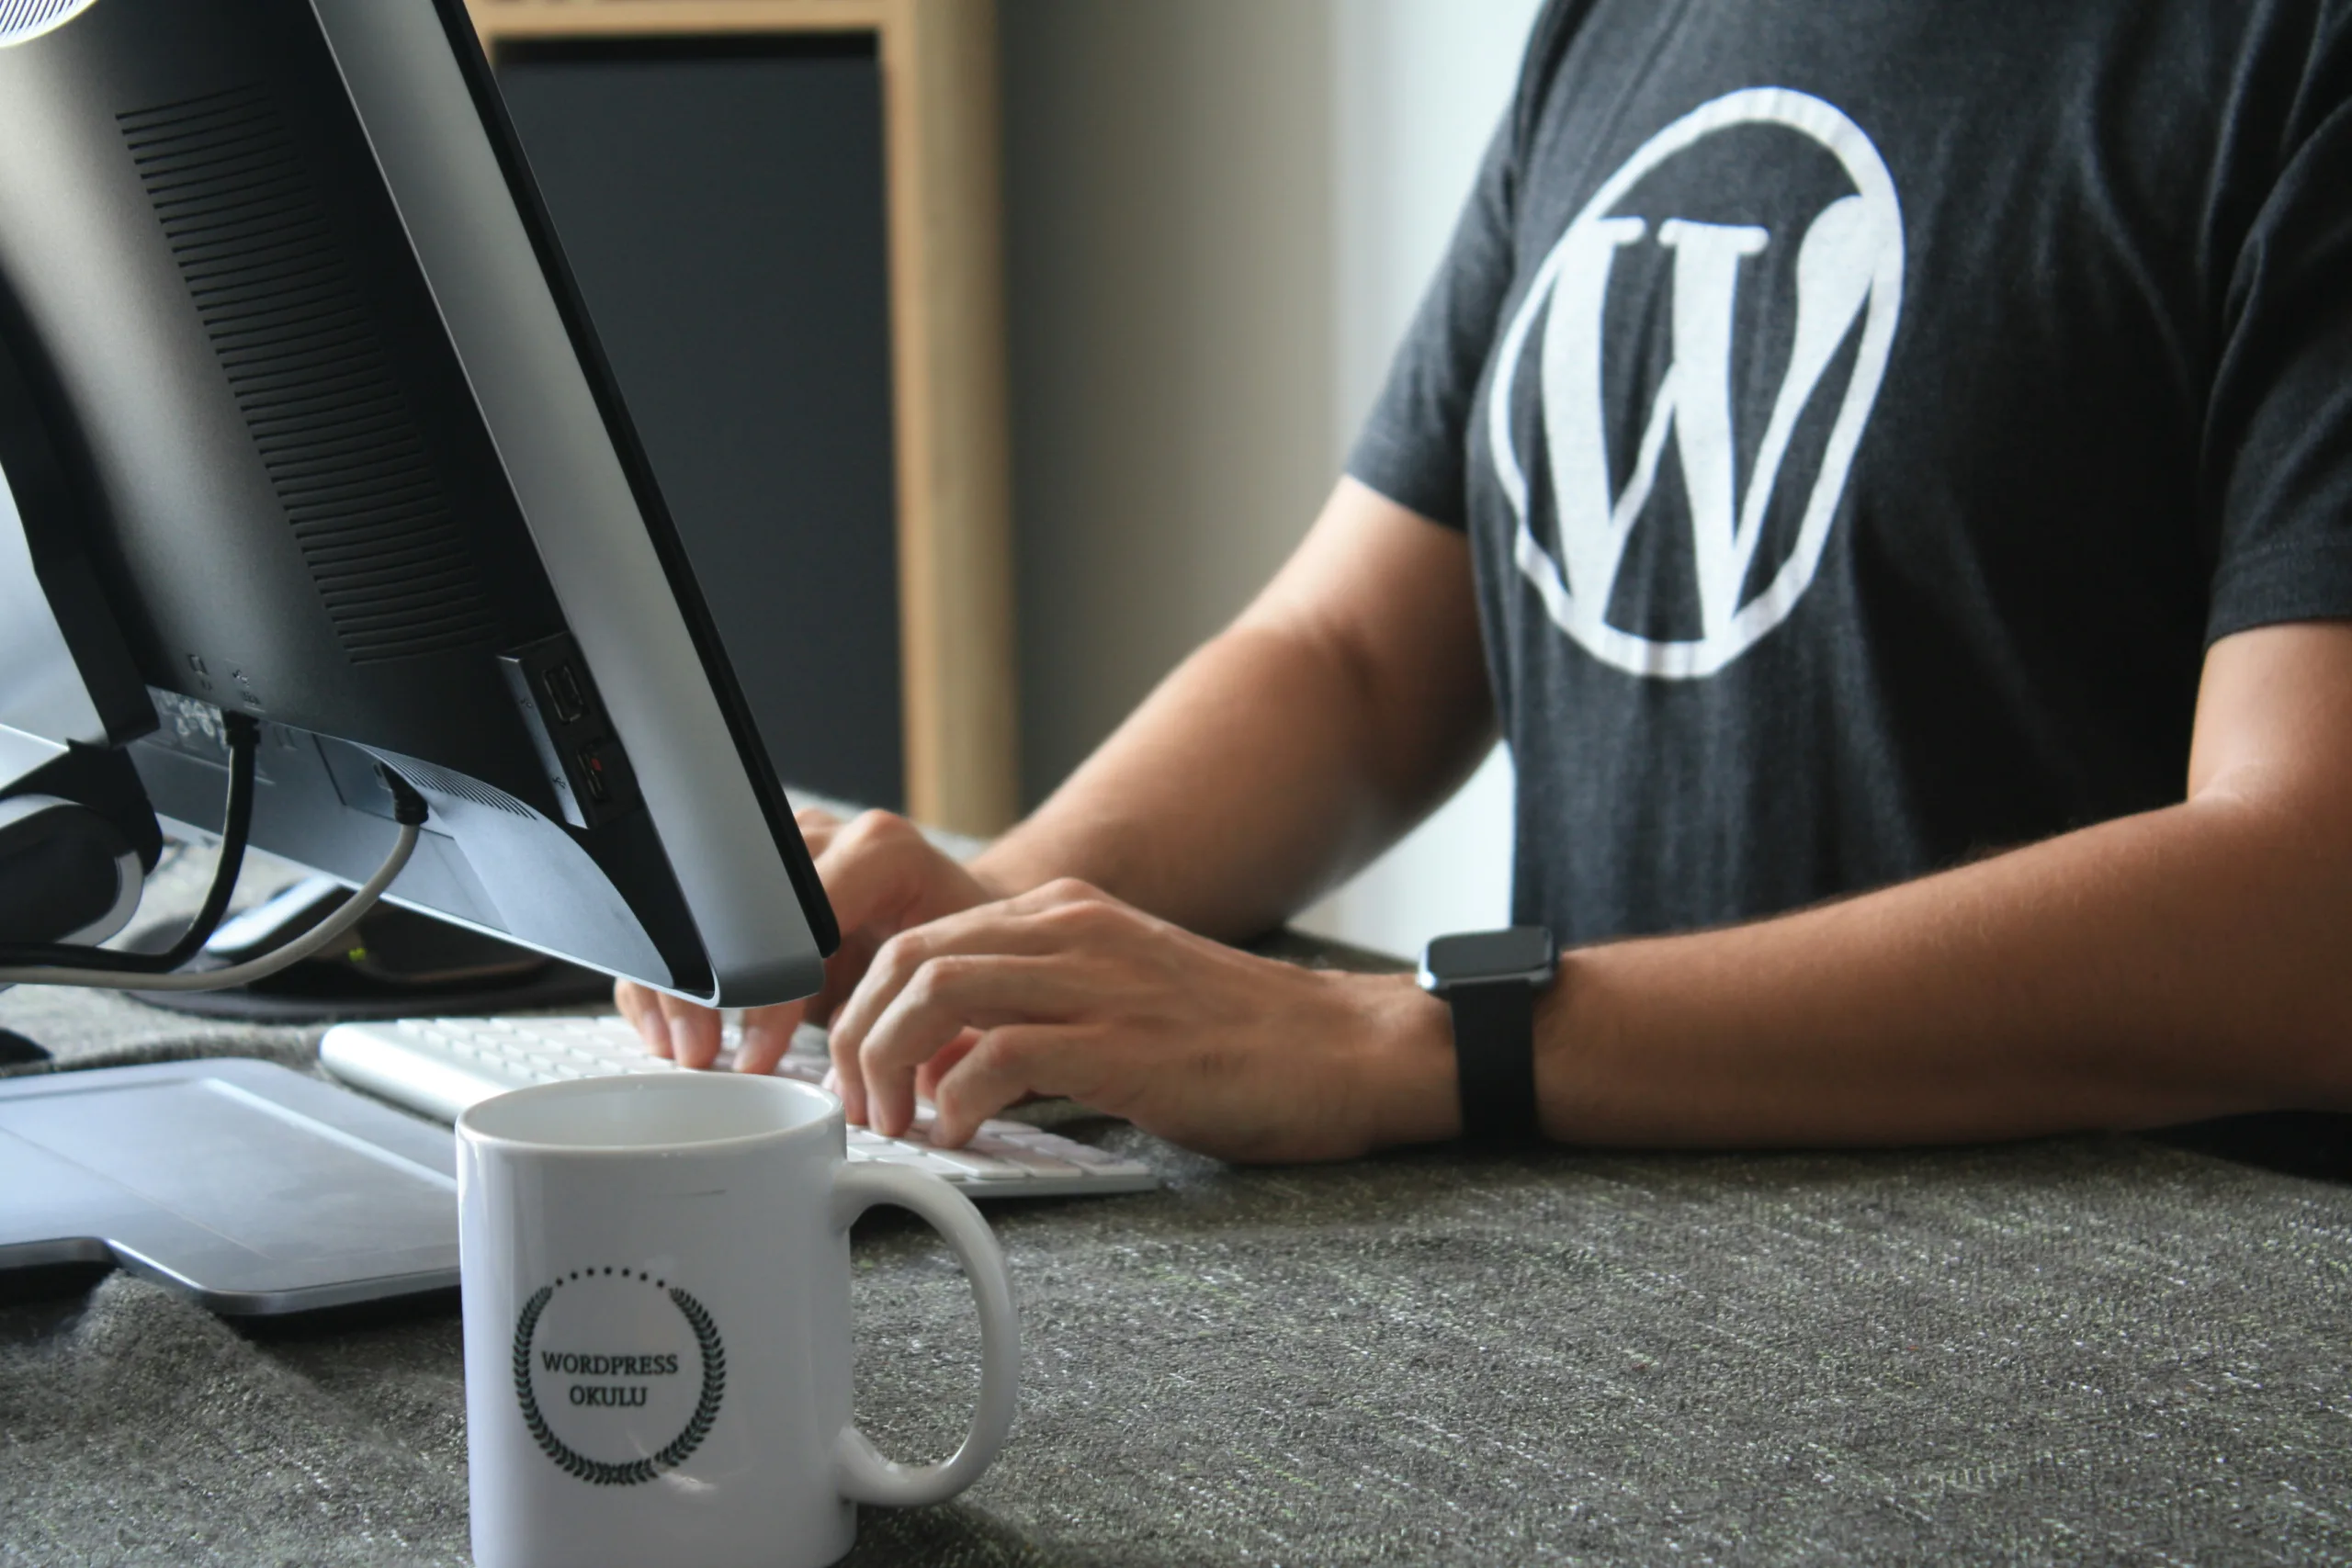 How To Create a WordPress Website in 20 Steps